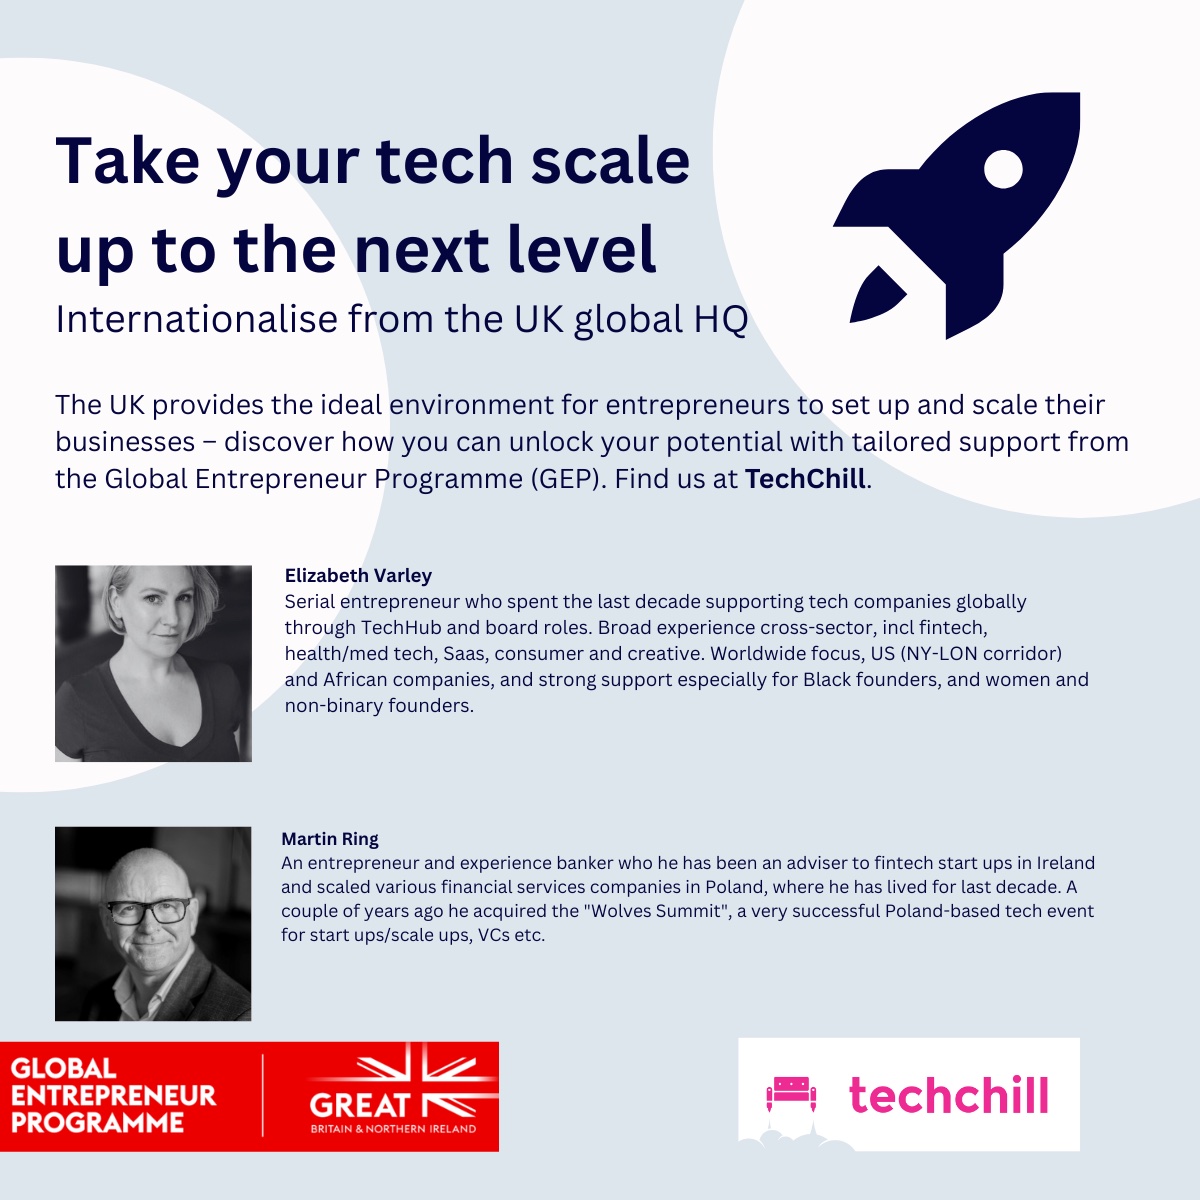 Dealmakers coming to TechChill from the UK.